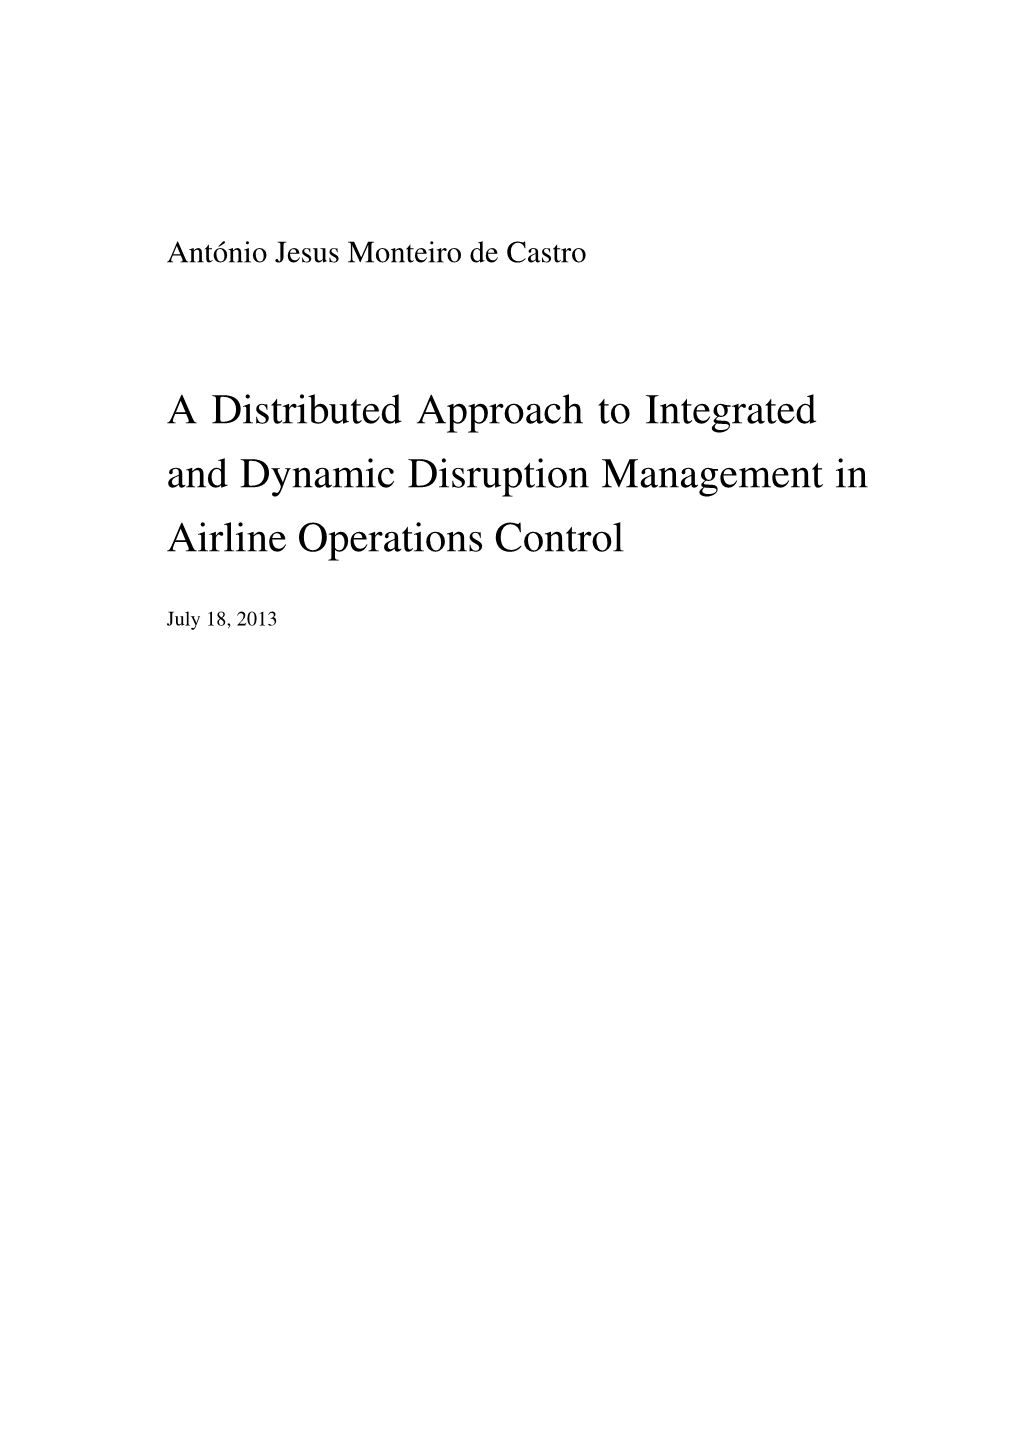 A Distributed Approach to Integrated and Dynamic Disruption Management in Airline Operations Control